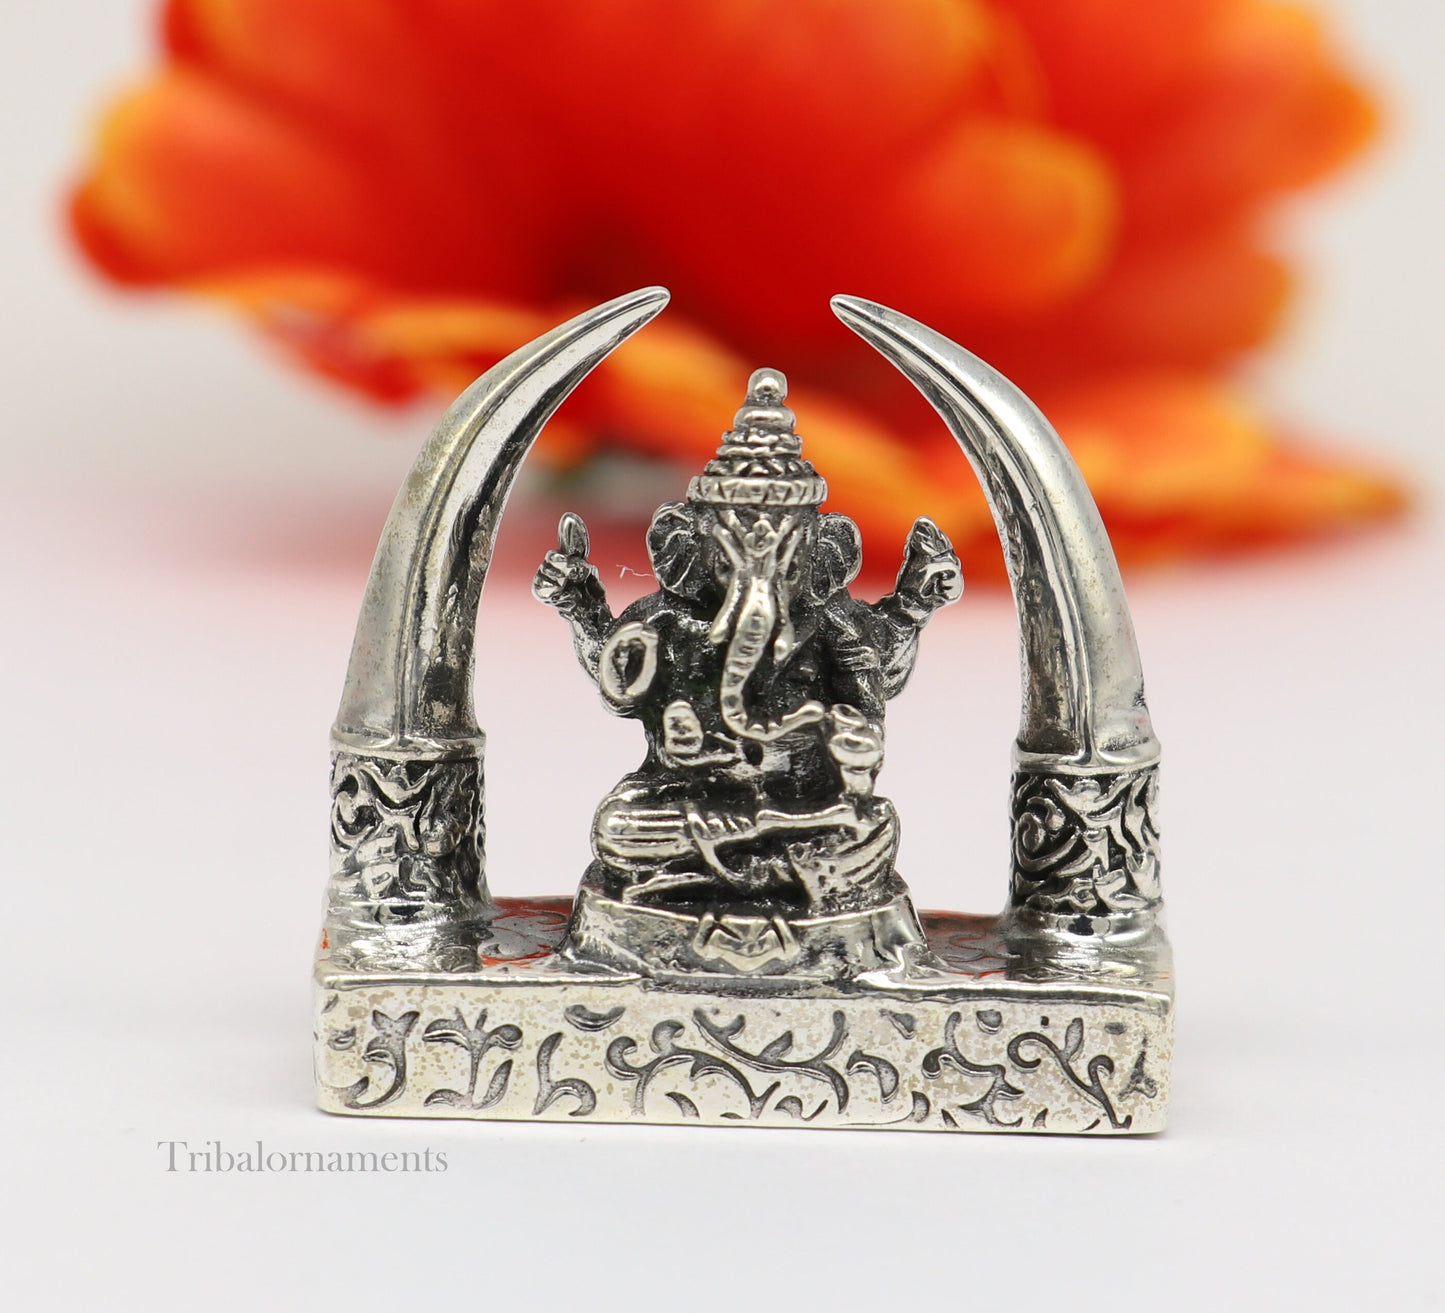 925 Sterling silver Idol lord Ganesha, Pooja Articles, Indian Silver Idols, handcrafted Ganesh statue sculpture Diwali puja gifting Art154 - TRIBAL ORNAMENTS